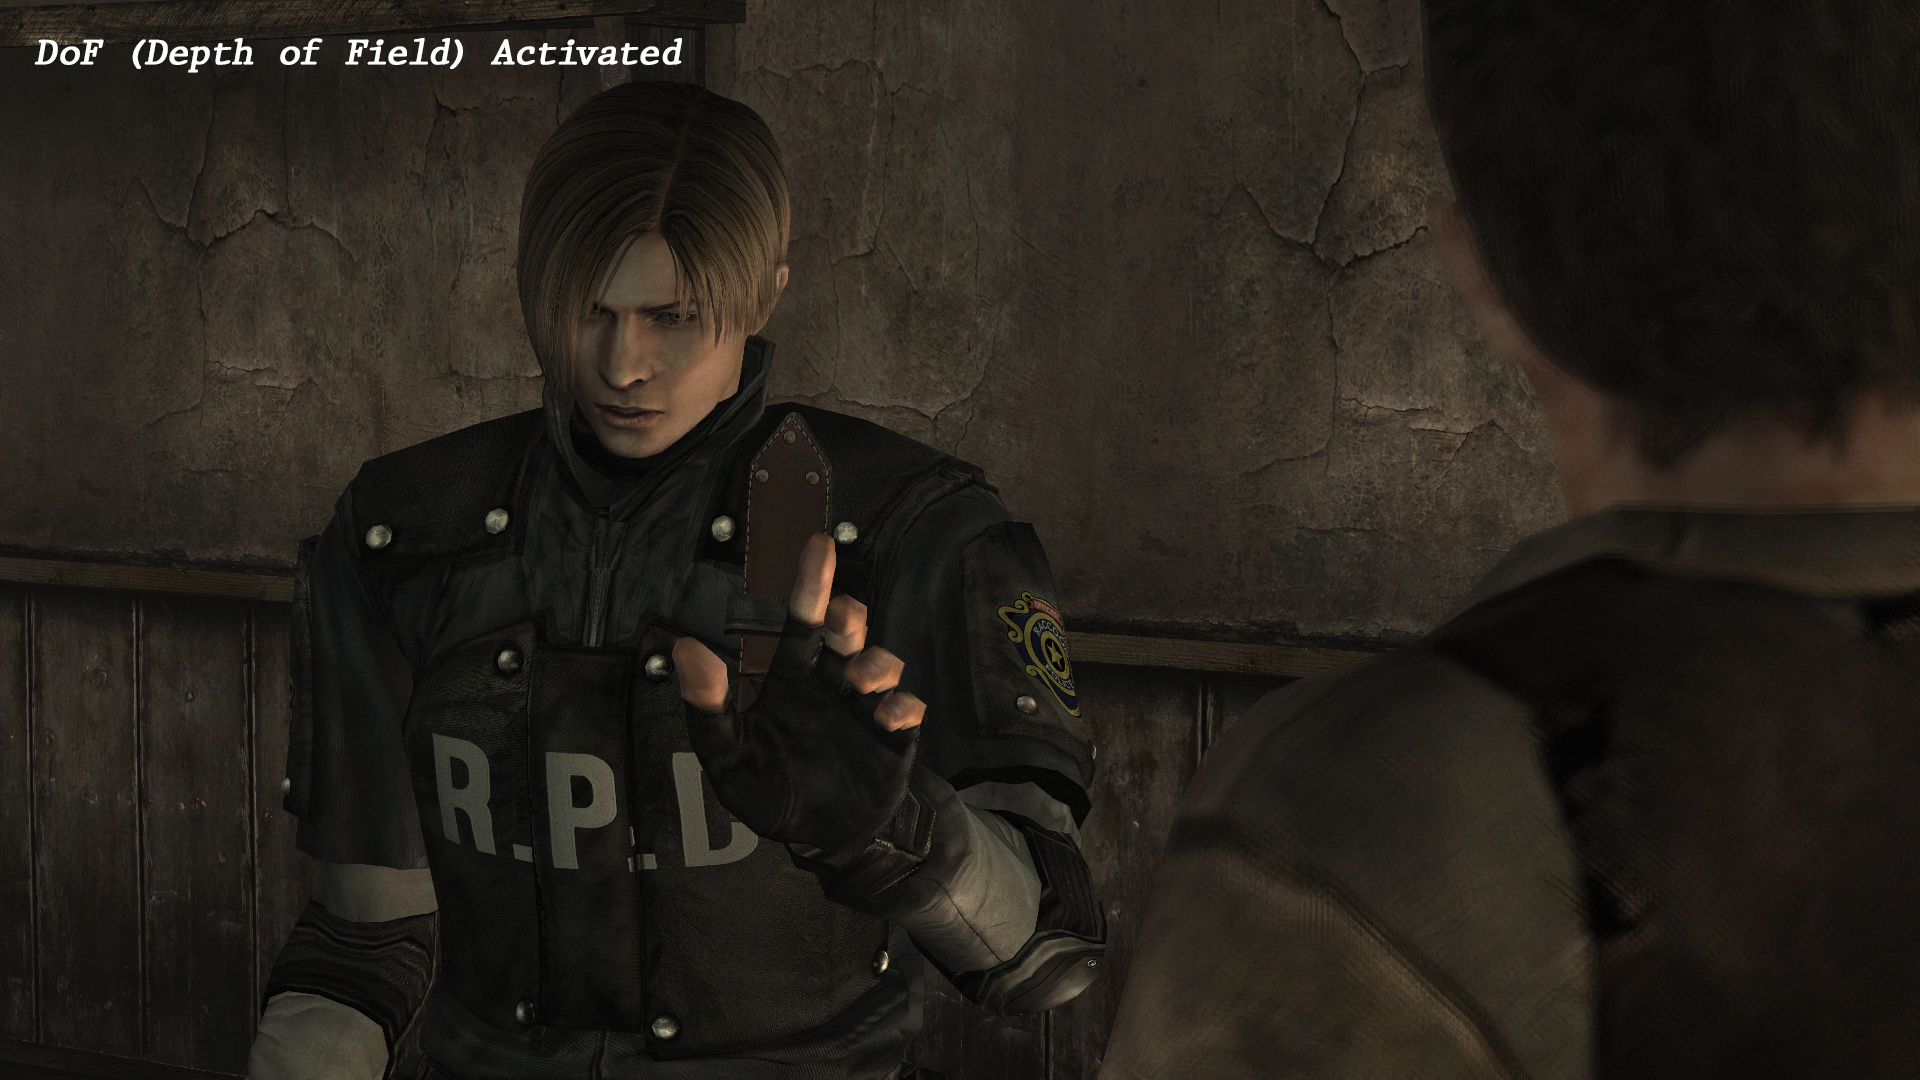 Resident Evil 4 HD project finally gets a release date